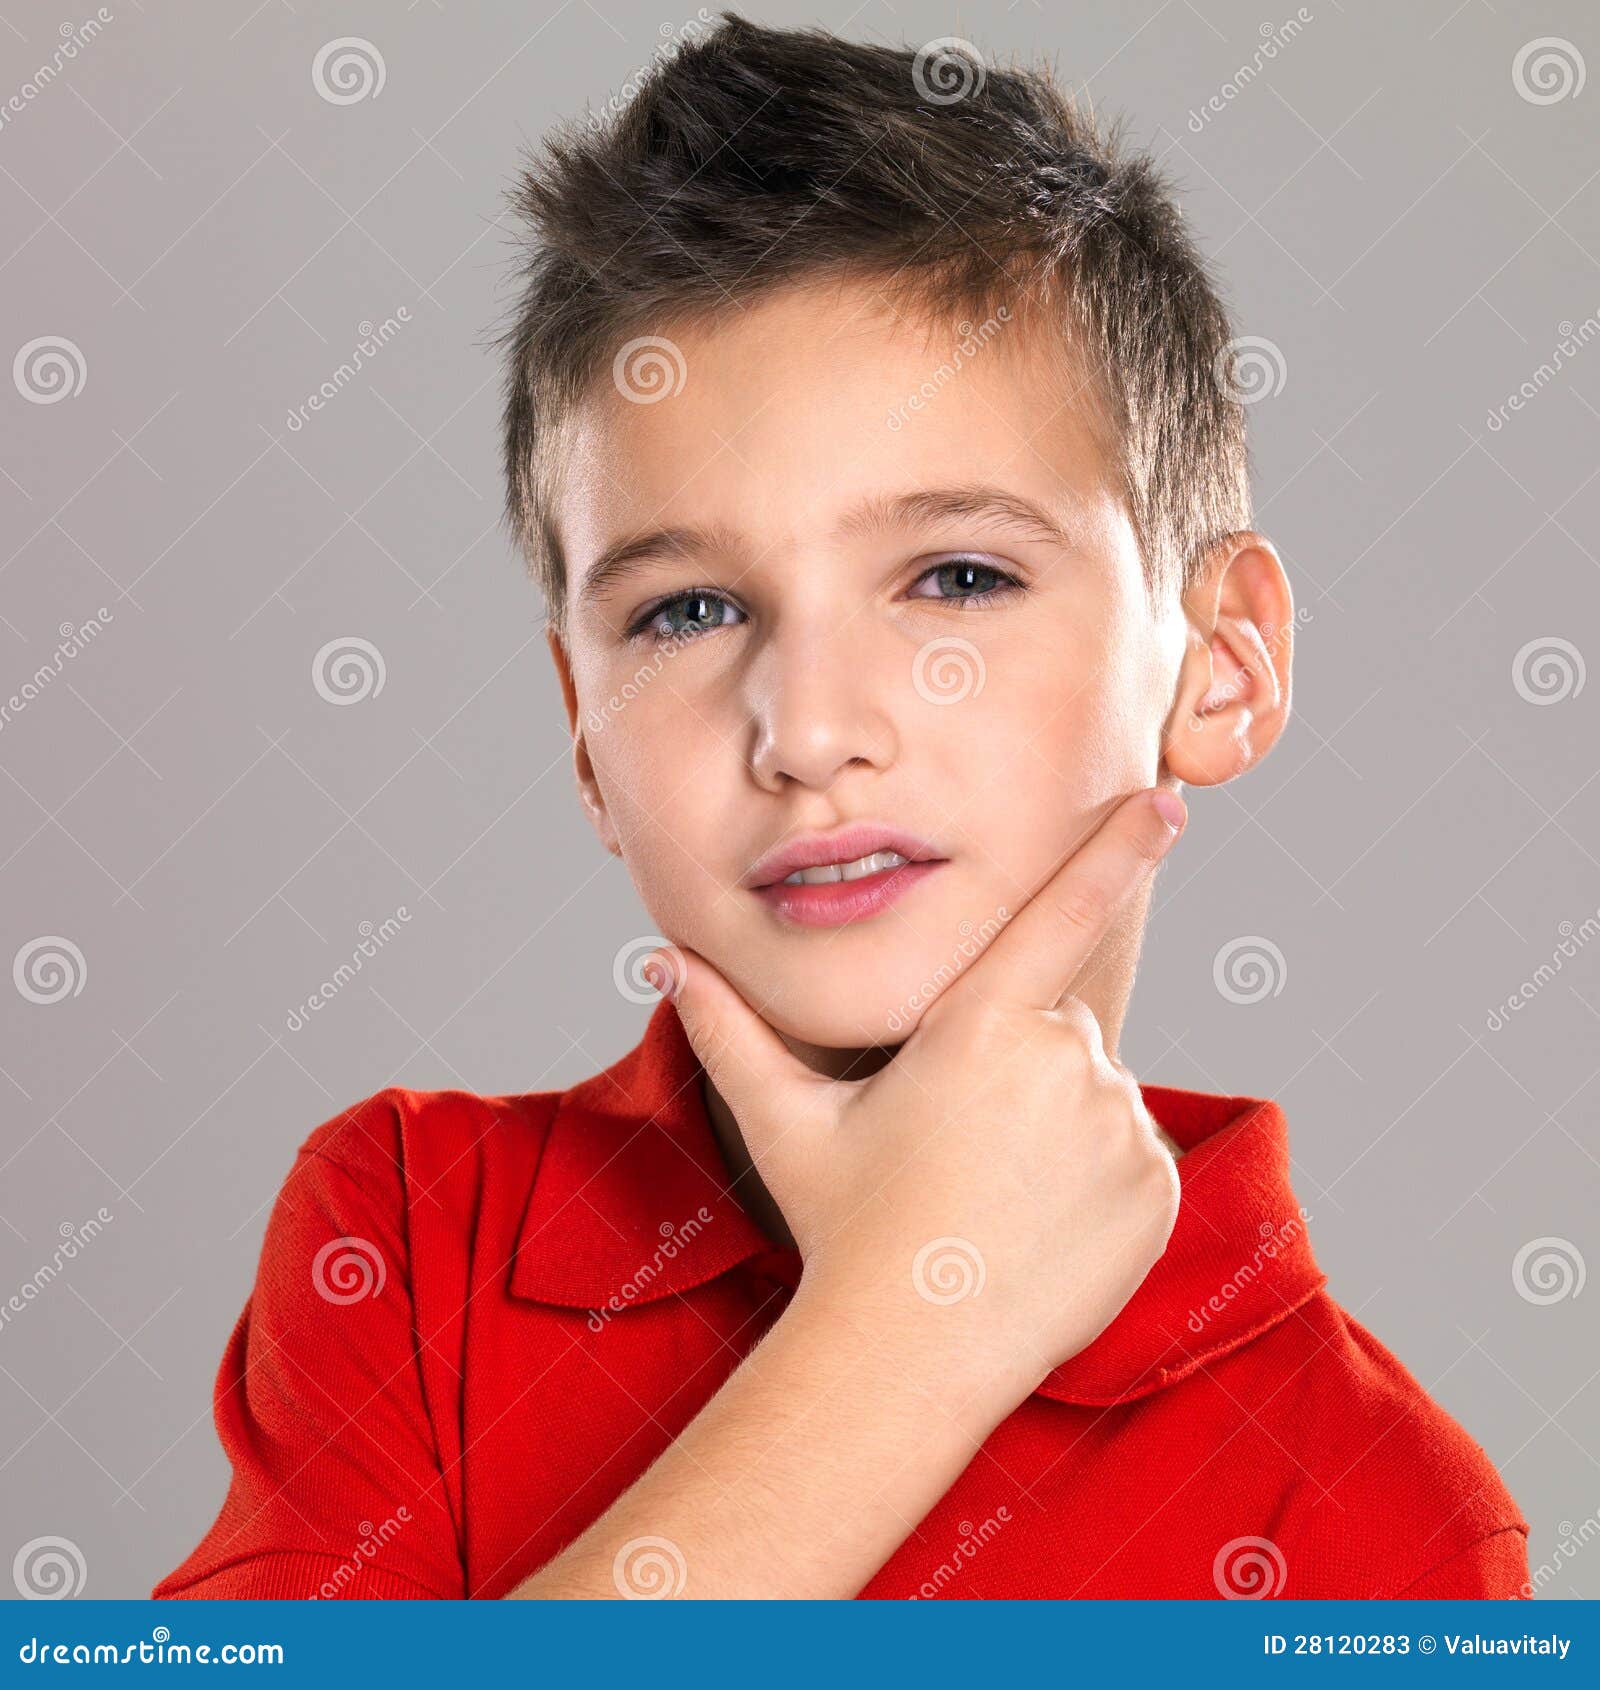 Portrait Of Adorable Young Beautiful Boy Stock Photos ...